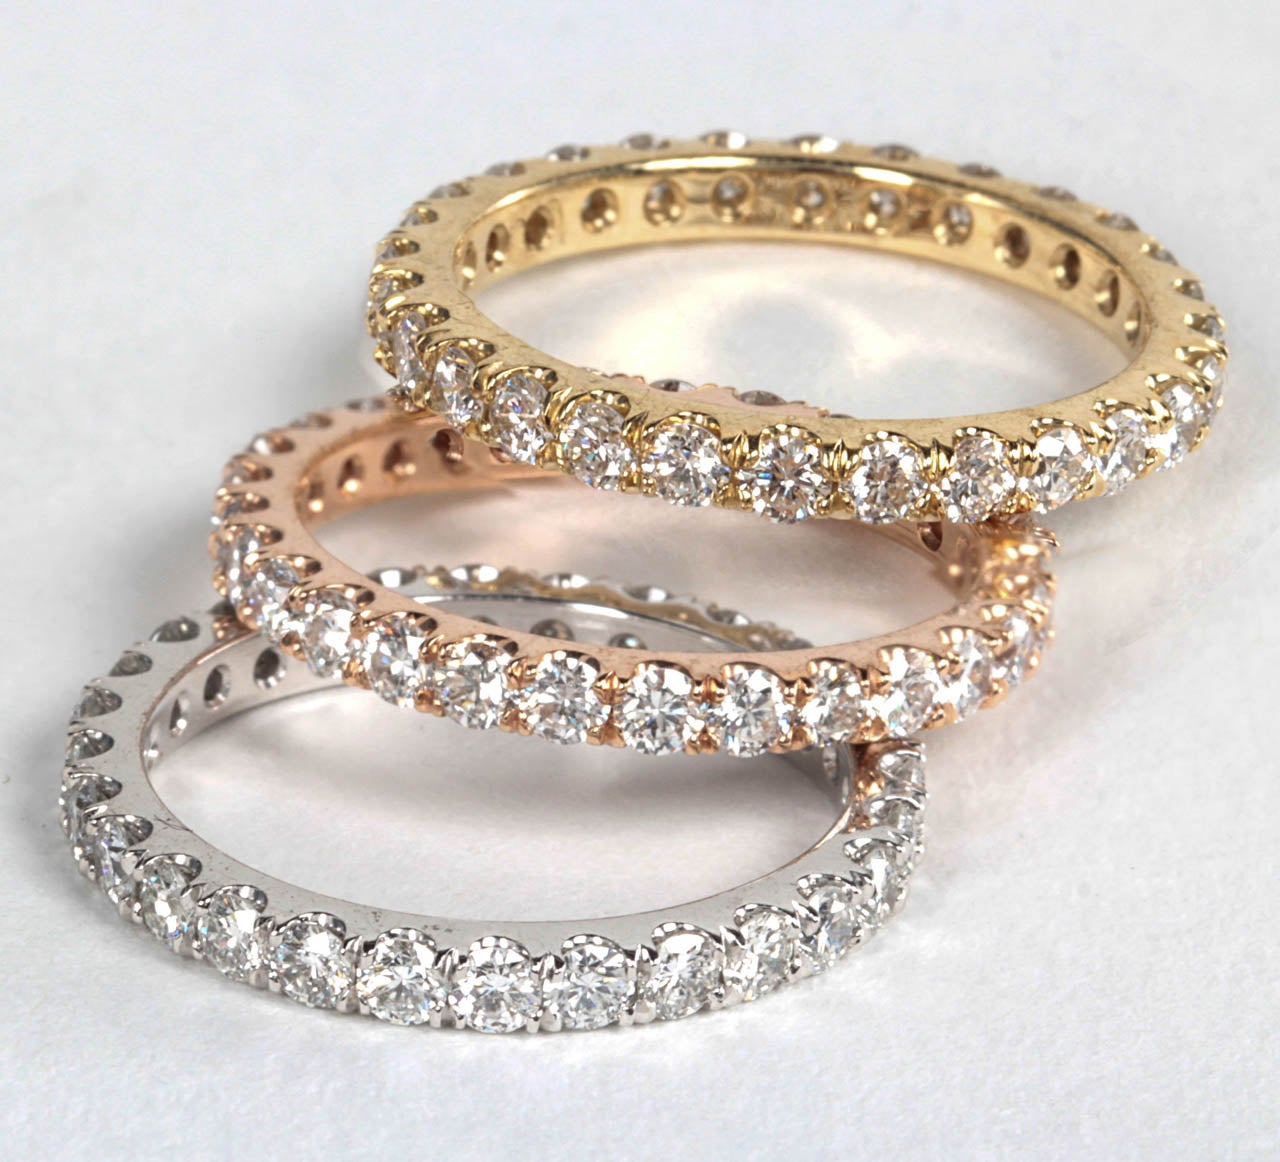 Three diamond eternity bands set in white, rose and yellow gold. 

The bands can be worn together or separately. 

3.65 carats of white round brilliant diamonds set in 14k gold.

Currently a size 6.5 -- Bands can be ordered to size.